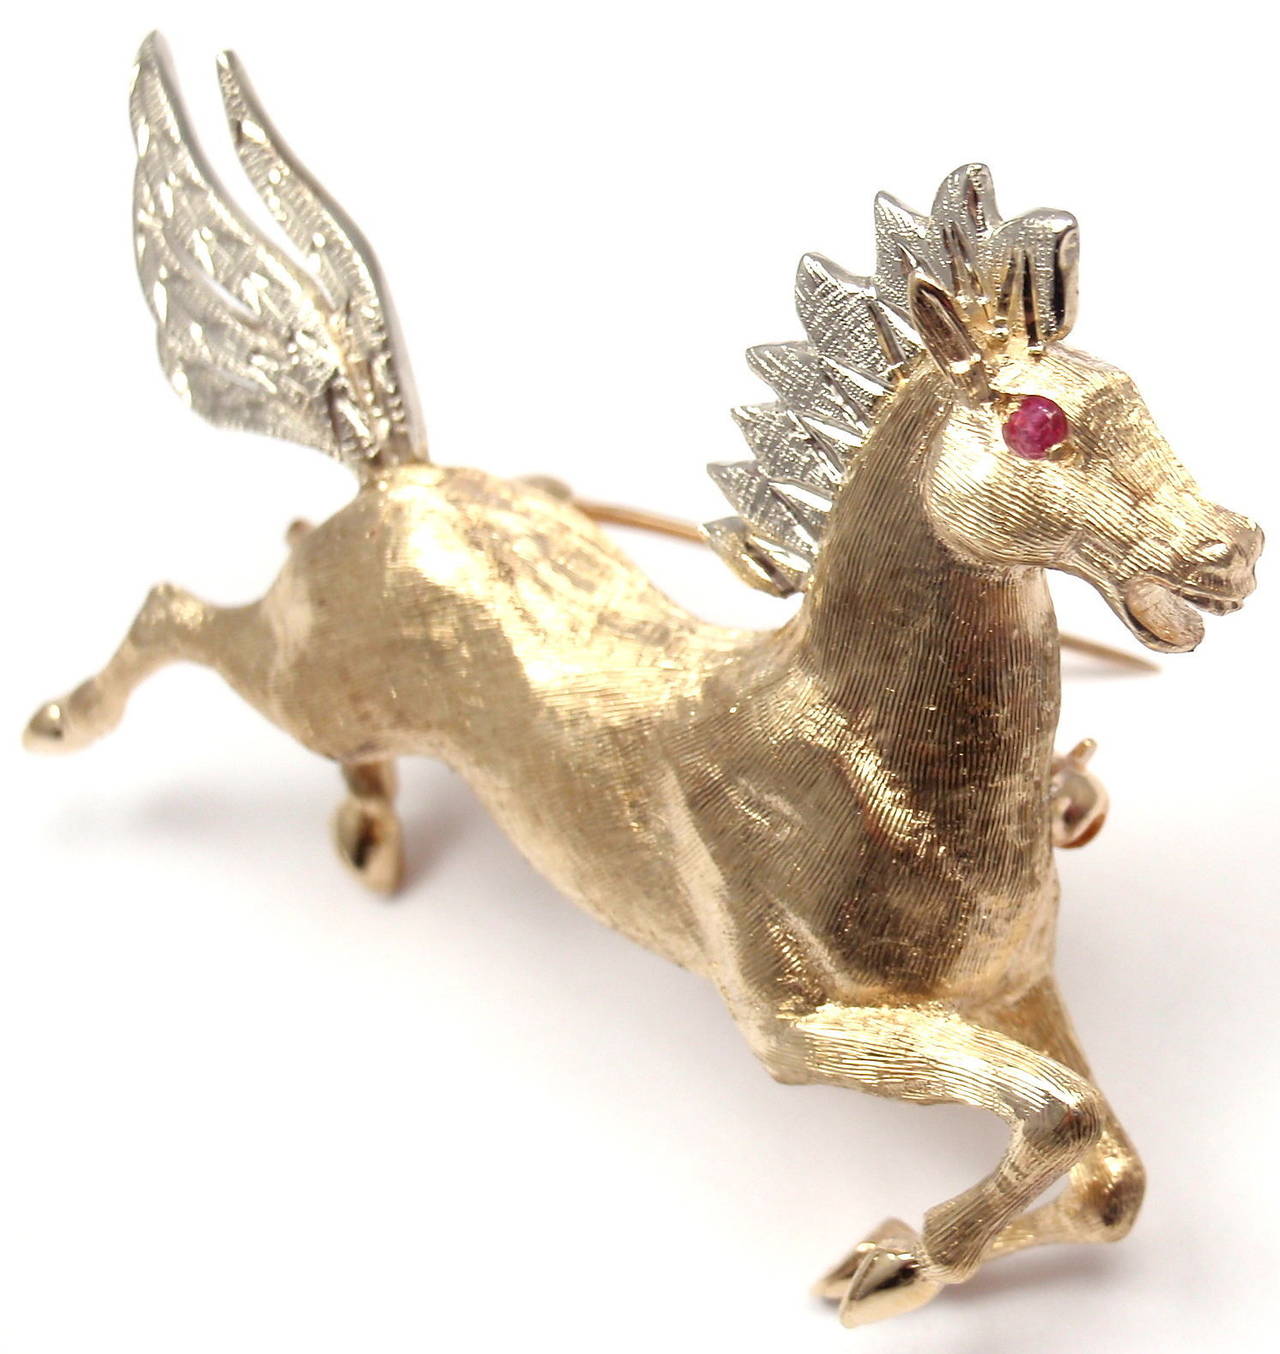 14k Yellow & White Gold Ruby Horse Brooch Pin by Tiffany & Co. 
With 1 round ruby in the eye

Details: 
Measurements: 2